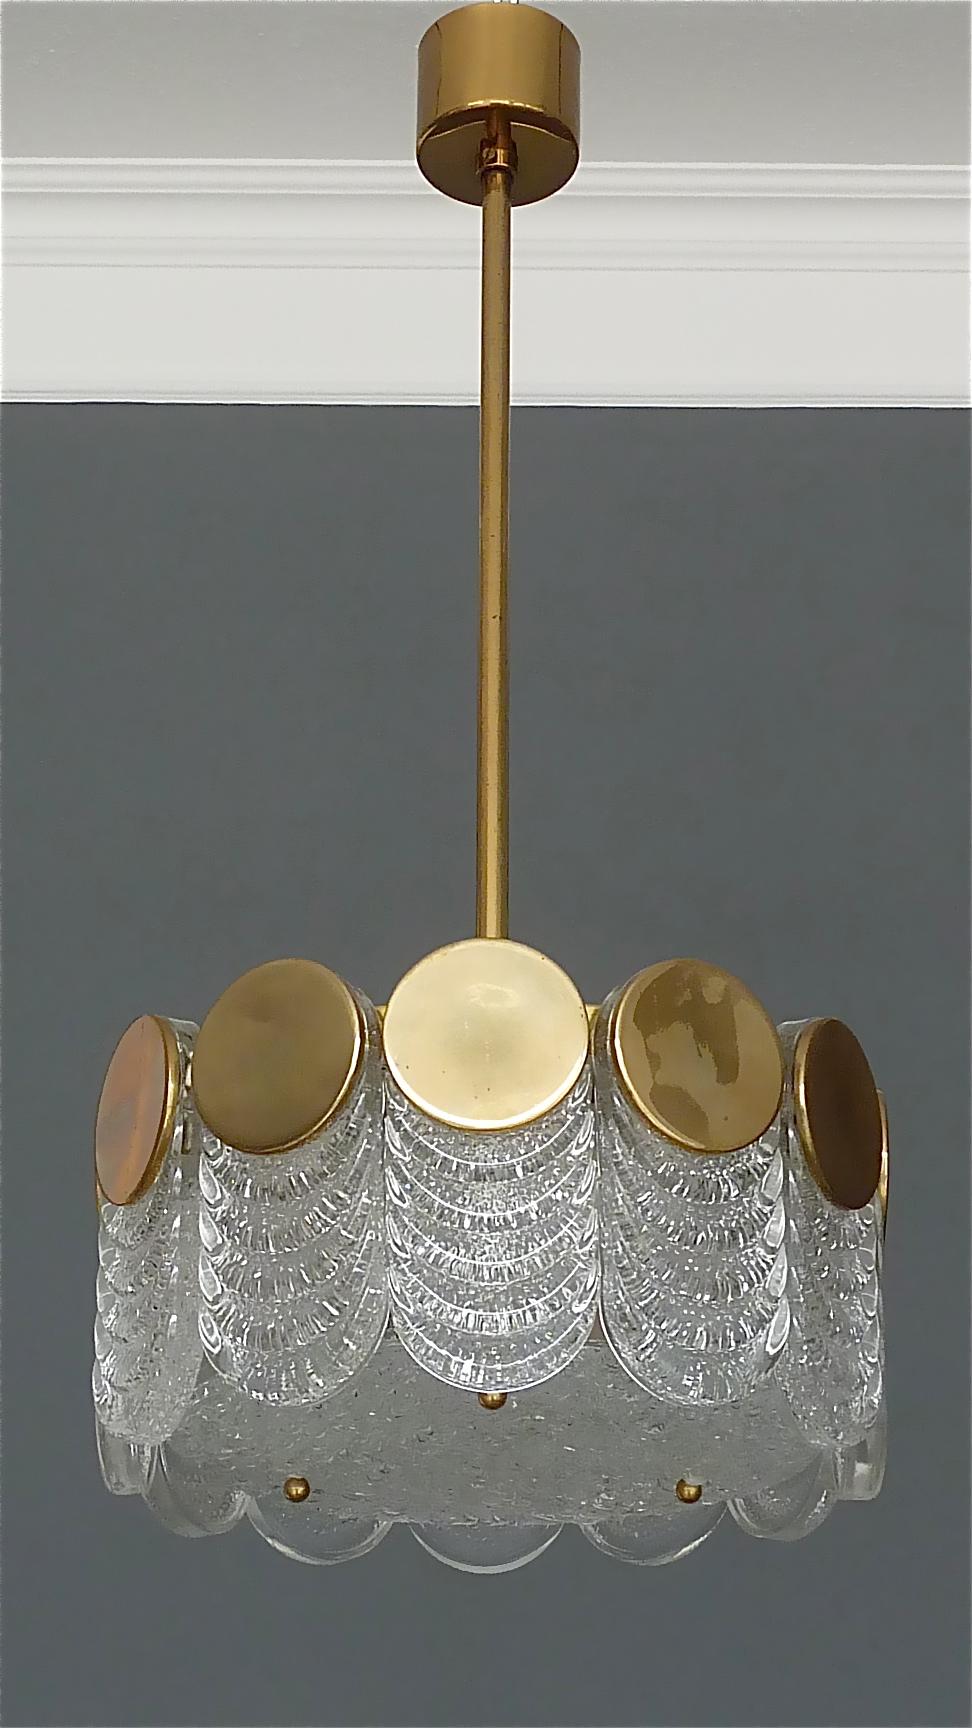 Brutalist Style Mid-Century Modern signed Kaiser drum chandelier/pendant lamp with textured ice-glass petals and patinated brass discs made in Germany, circa 1960-1970. It has twelve 1,5 cm / 0.60 inches thick glass panels and one center glass disc